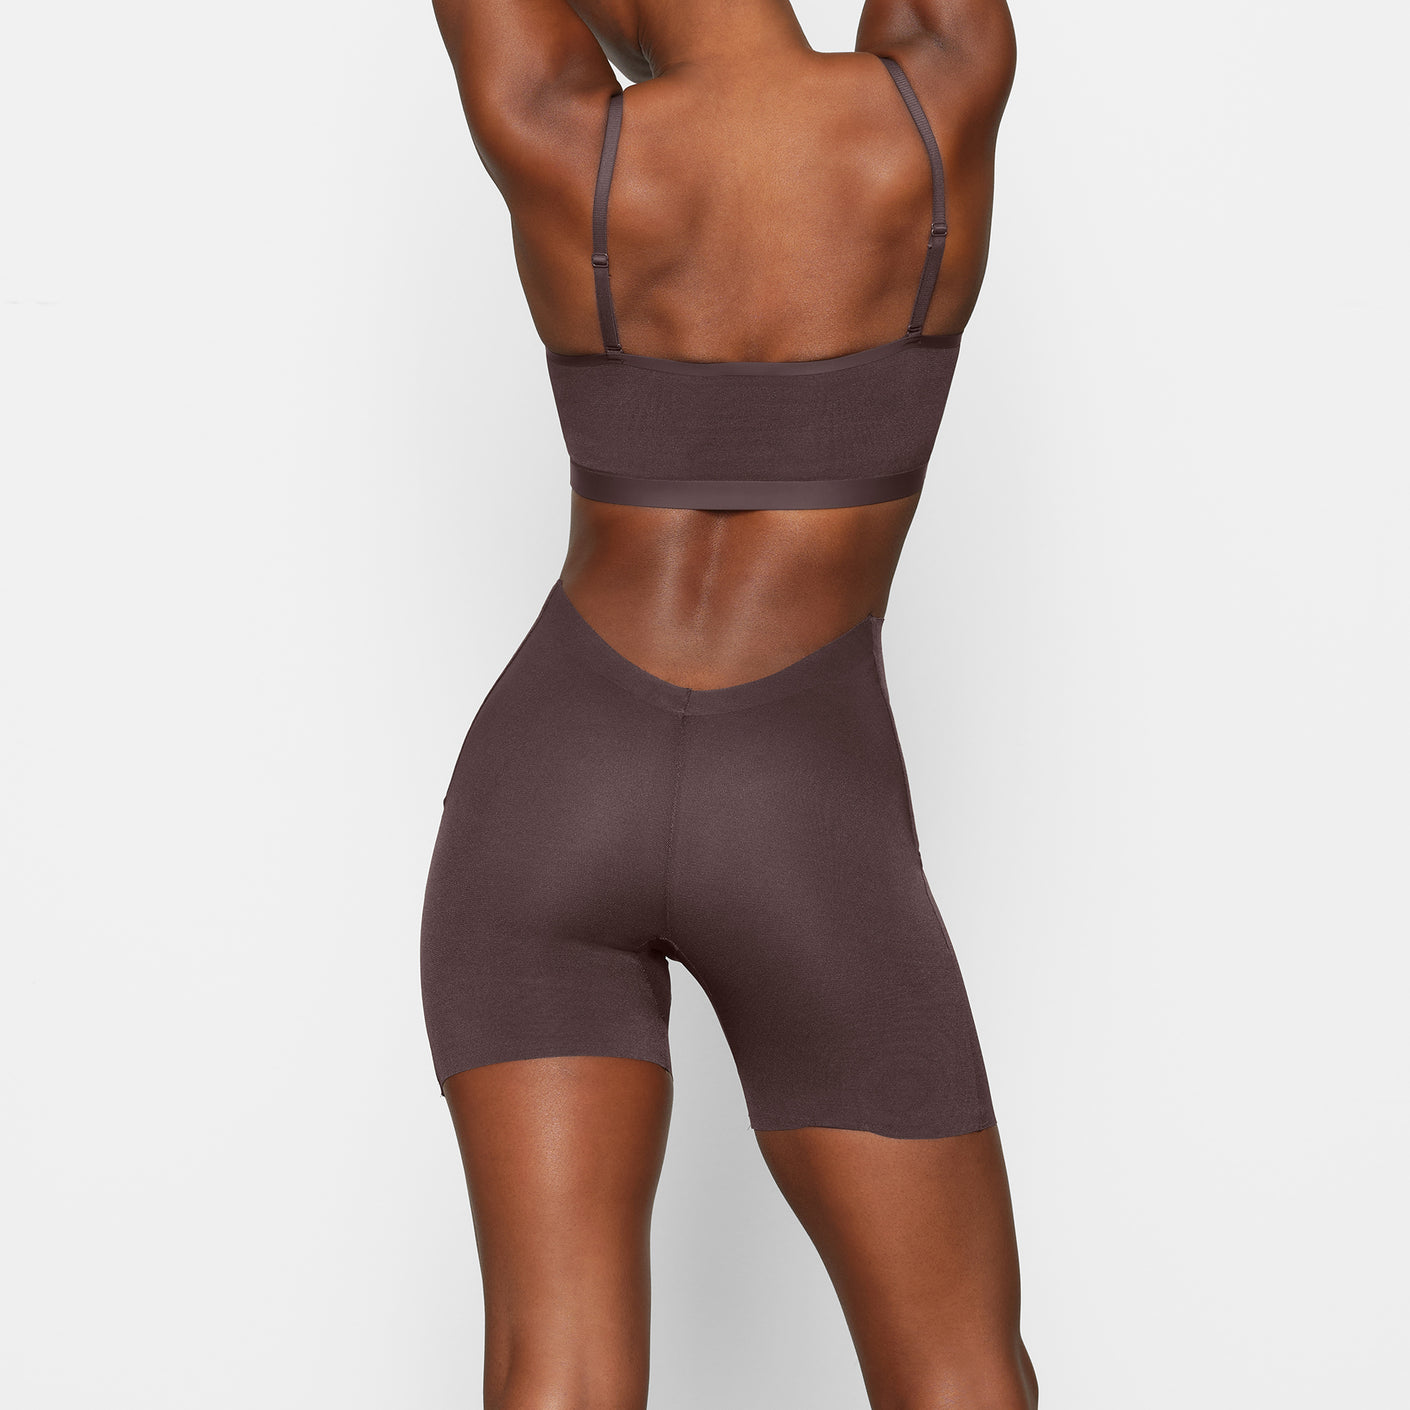 Get ready with@Jessica Bailey in the #SKIMS Sheer Sculpt Low Back